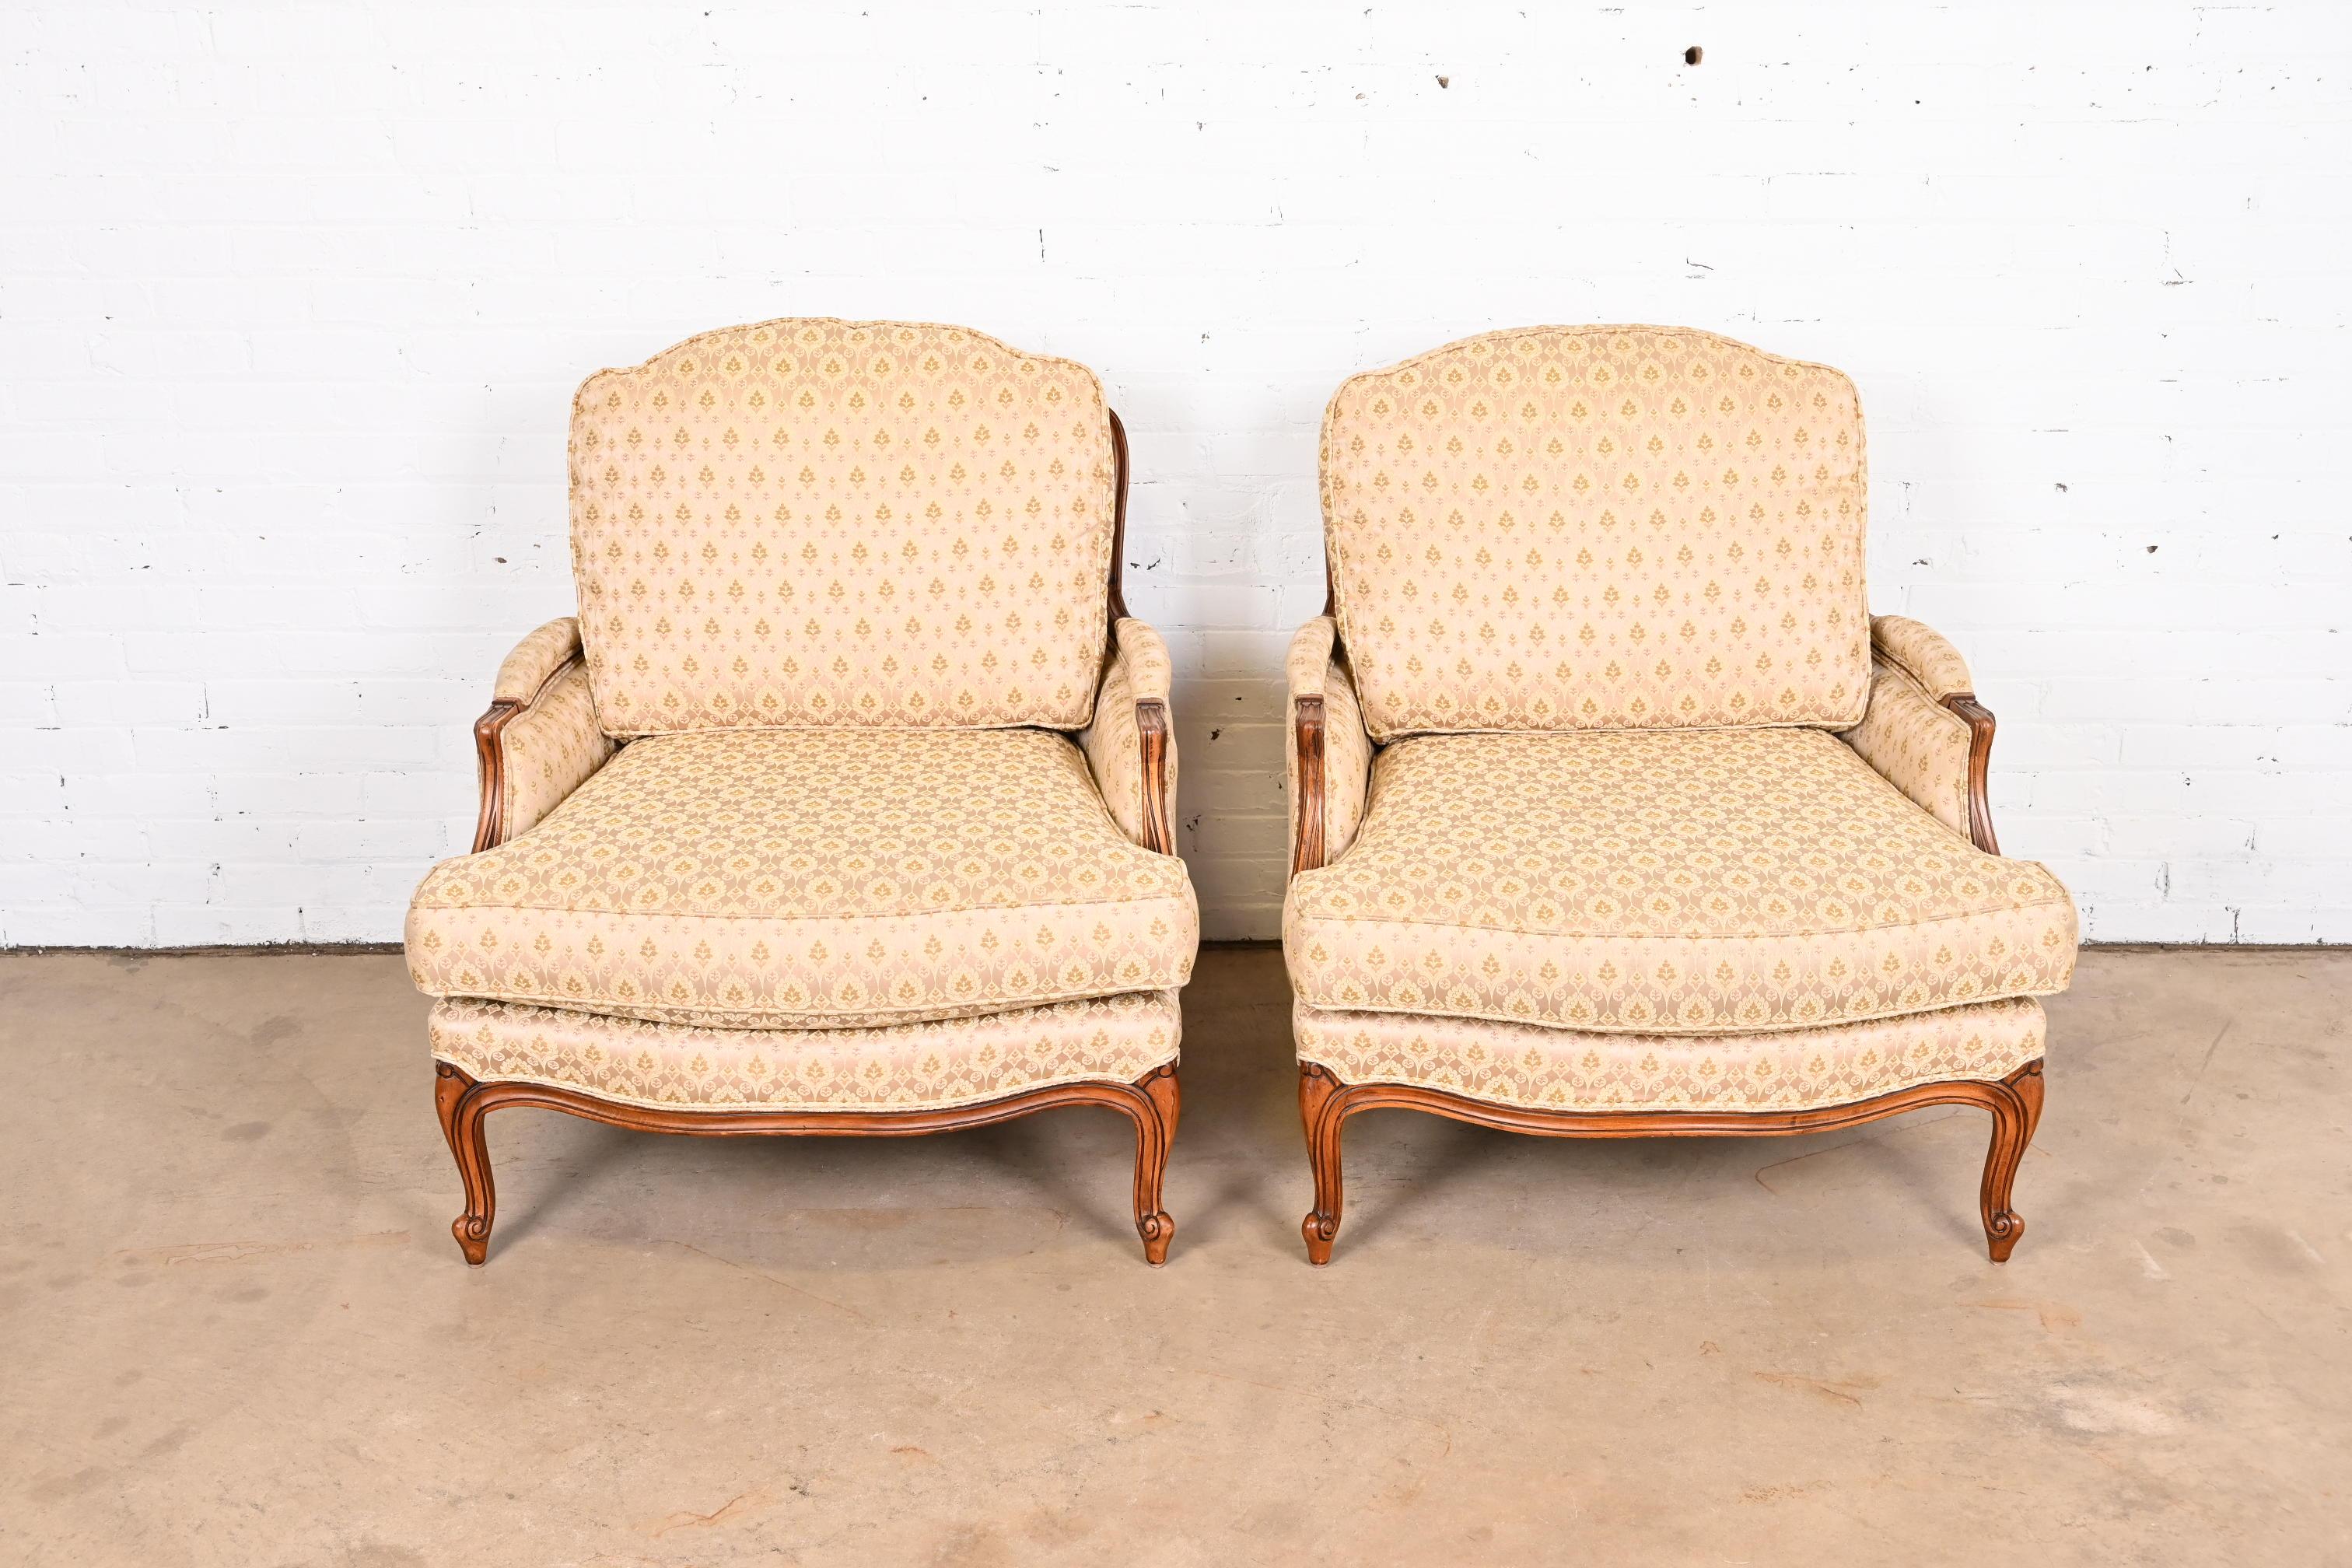 American Ethan Allen French Provincial Louis XV Bergère Chairs, Pair